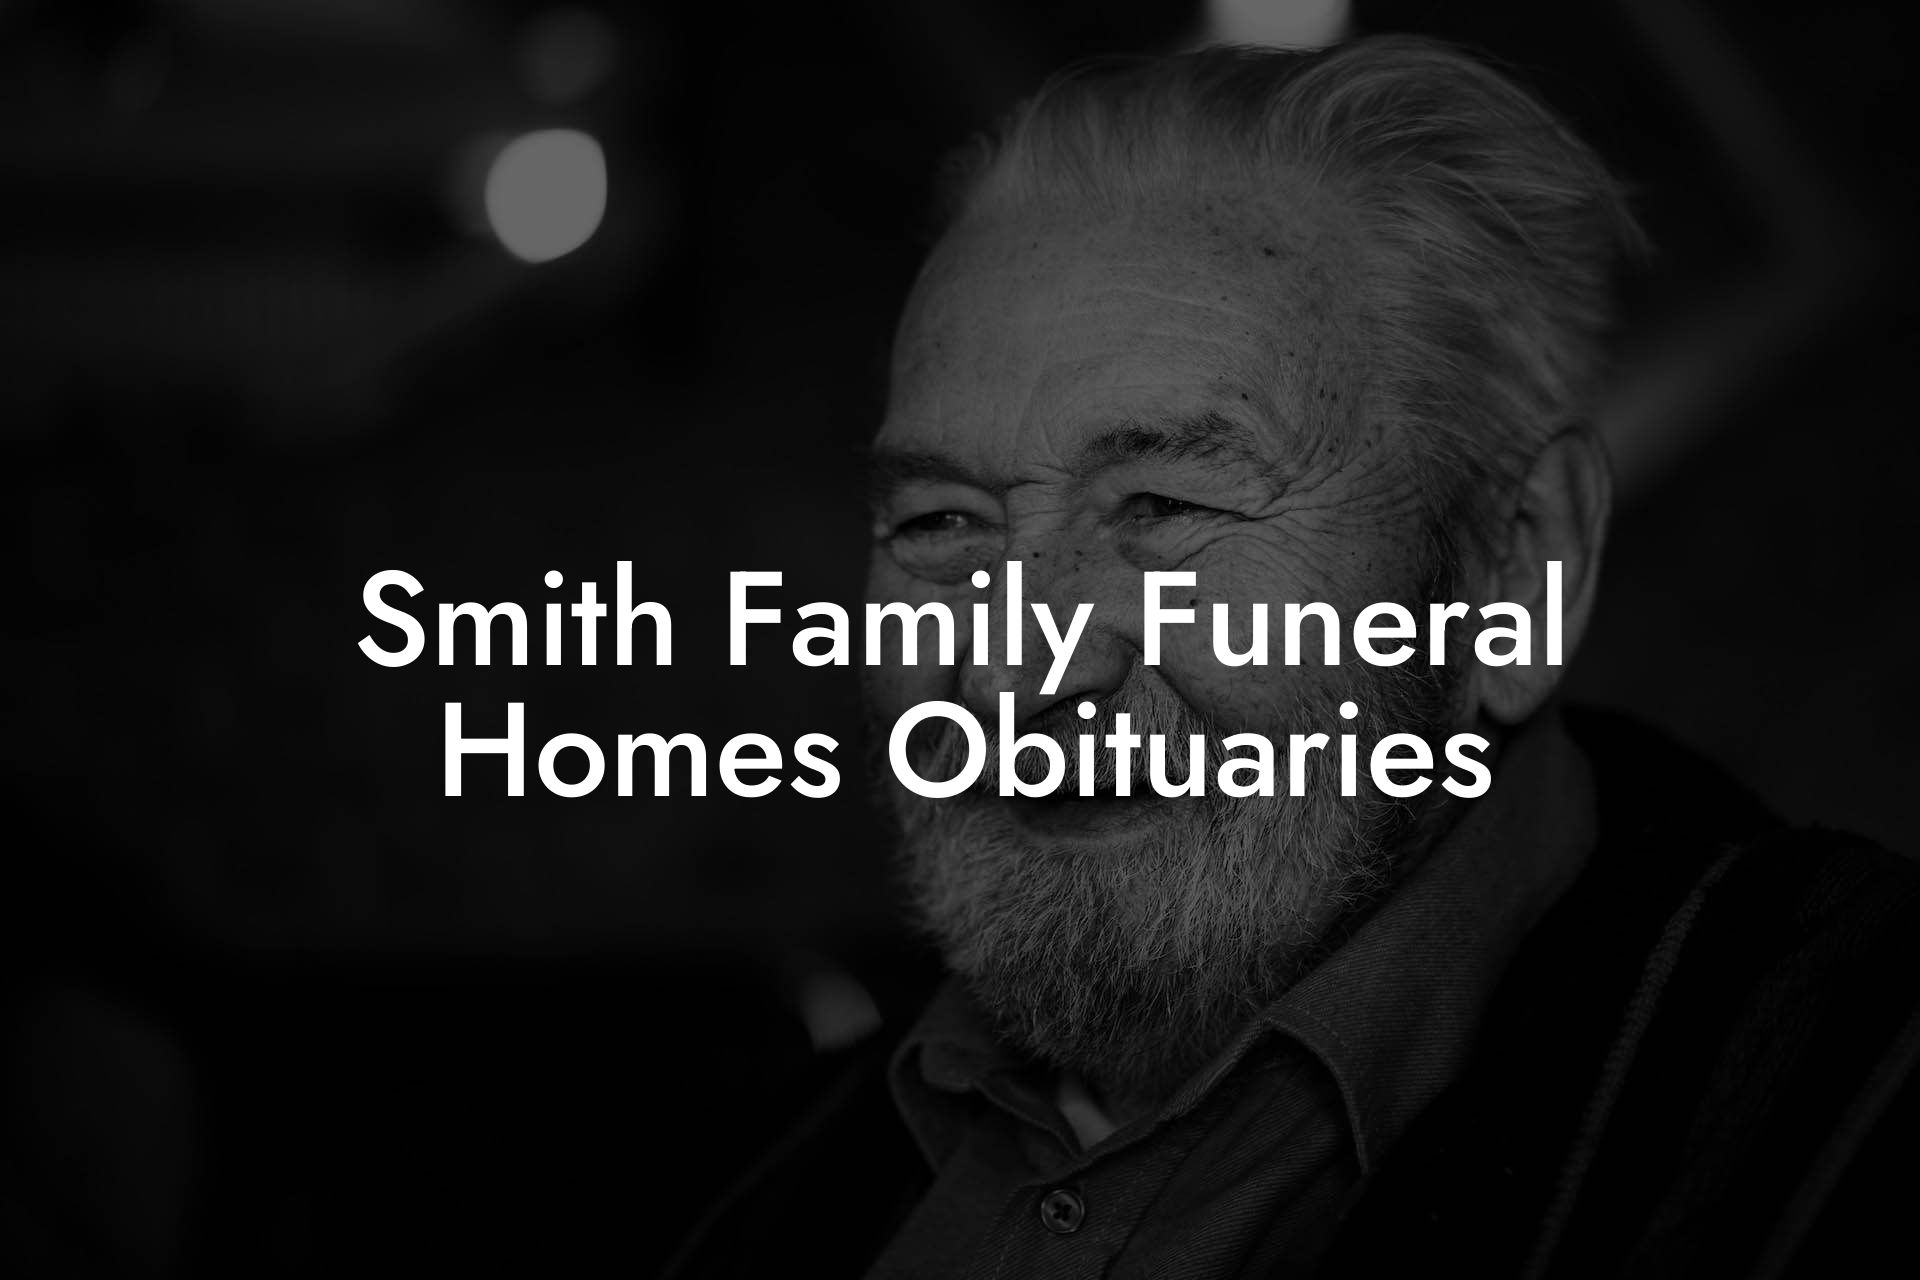 Smith Family Funeral Homes Obituaries